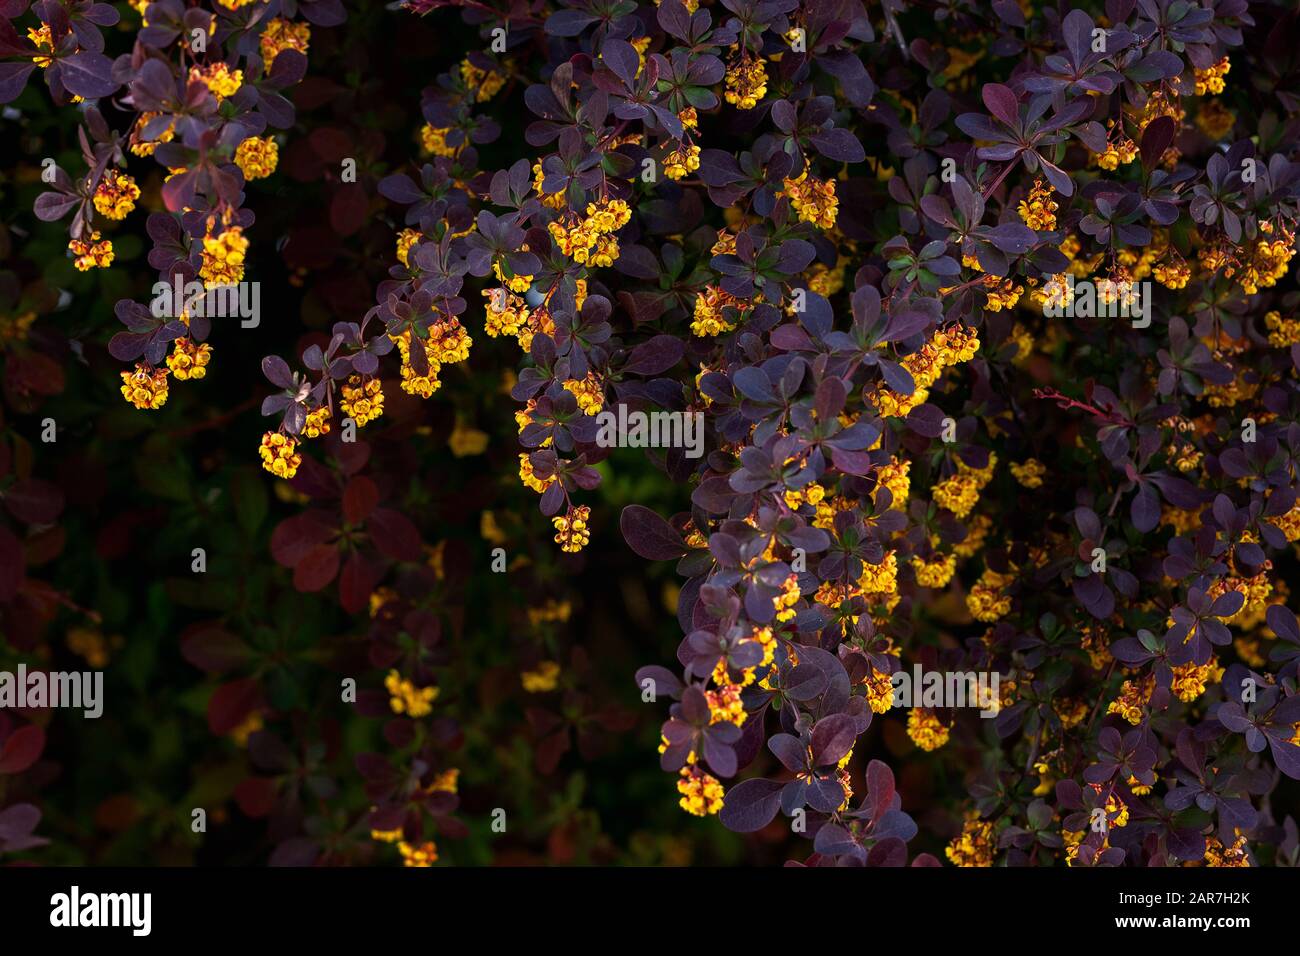 Beautiful Blooming Yellow flowers by a bush with purple leaves. Berberis ottawensis auricoma plant. Stock Photo